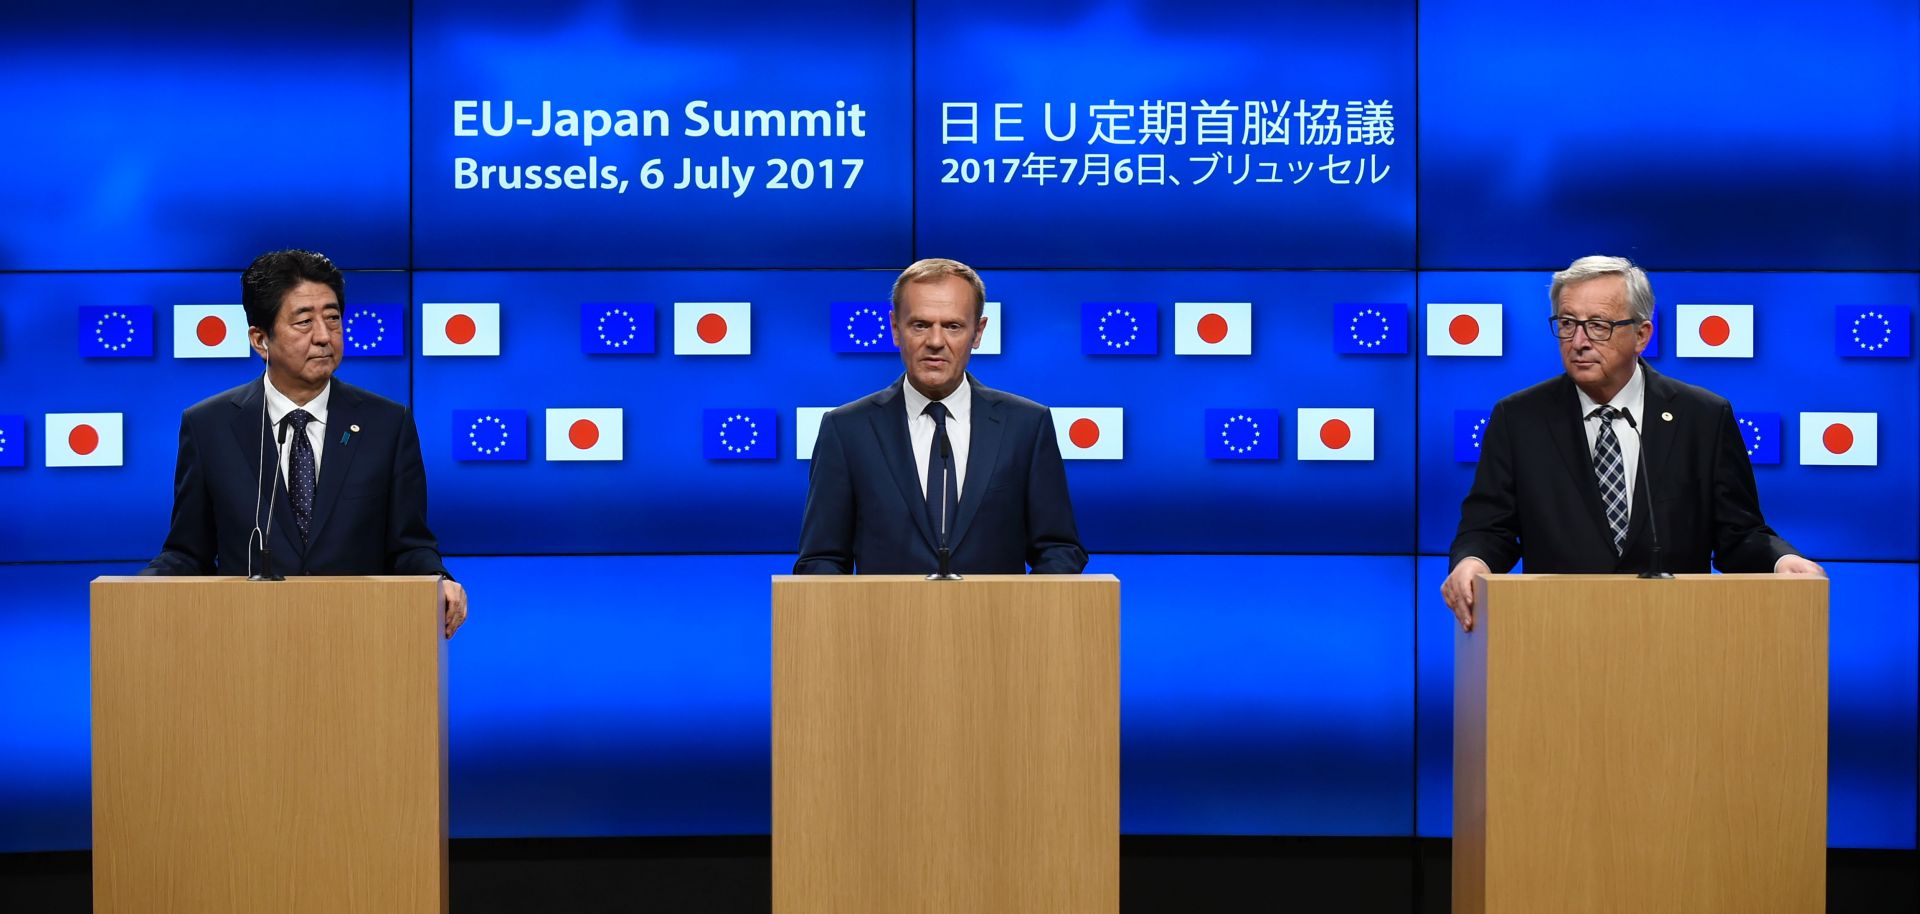 In this photograph, Japanese Prime Minister Shinzo Abe (left to right), European Council President Donald Tusk and European Commission President Jean-Claude Juncker speak at a news conference after an EU-Japan summit in Brussels on July 6, 2017.